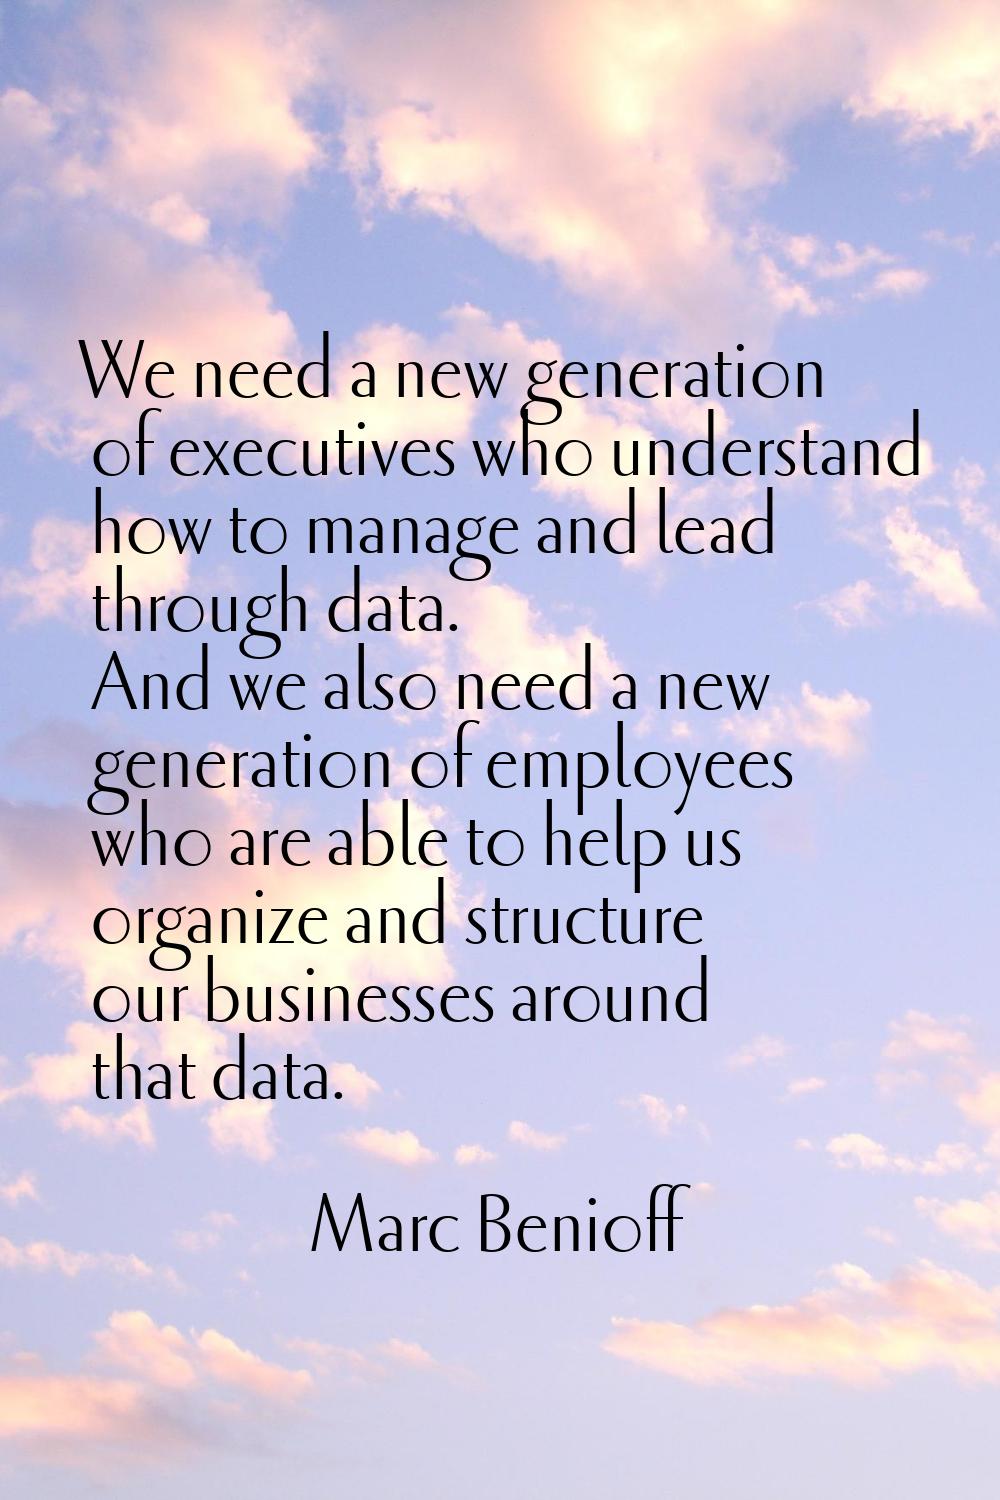 We need a new generation of executives who understand how to manage and lead through data. And we a